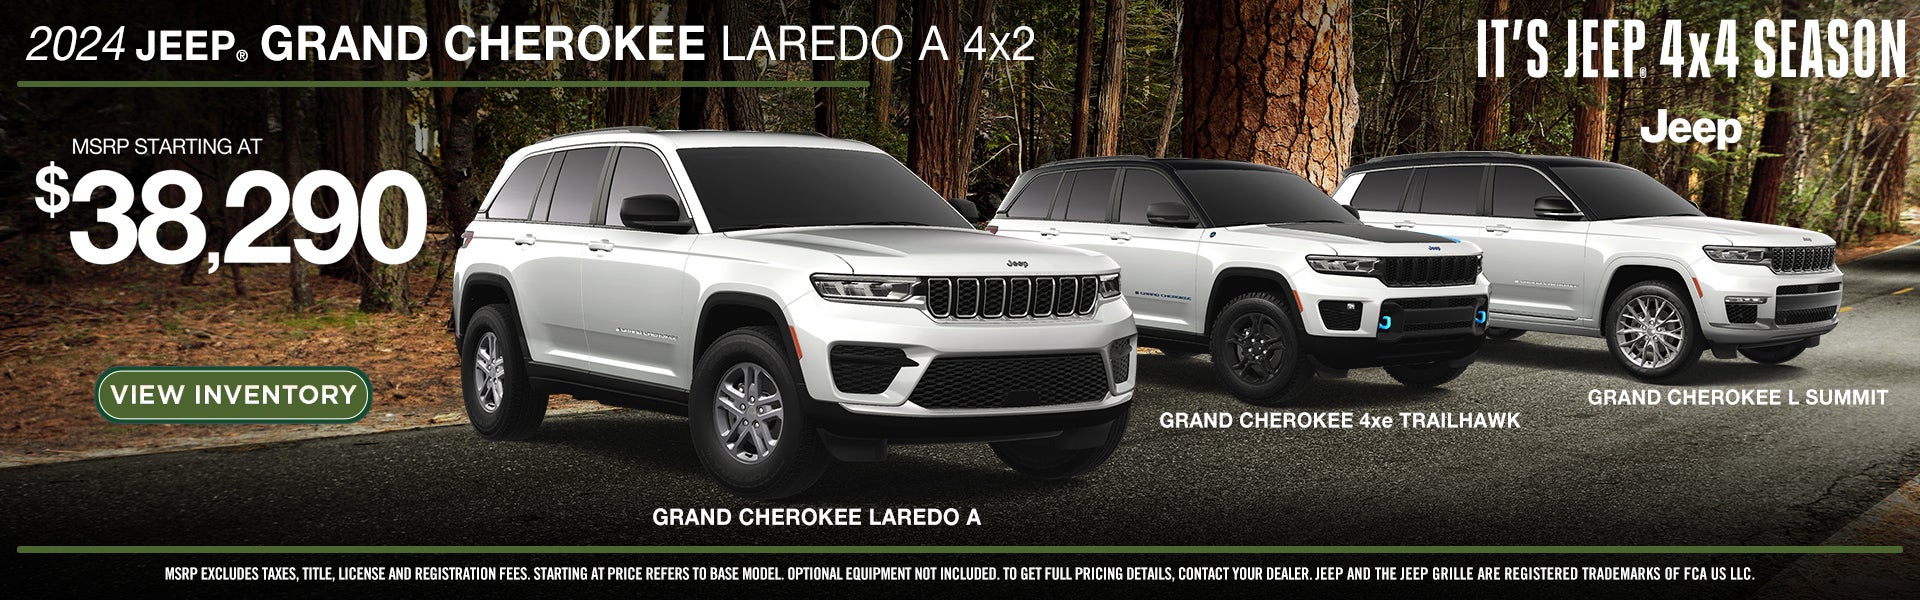 24 Jeep Grand Cherokee Offer